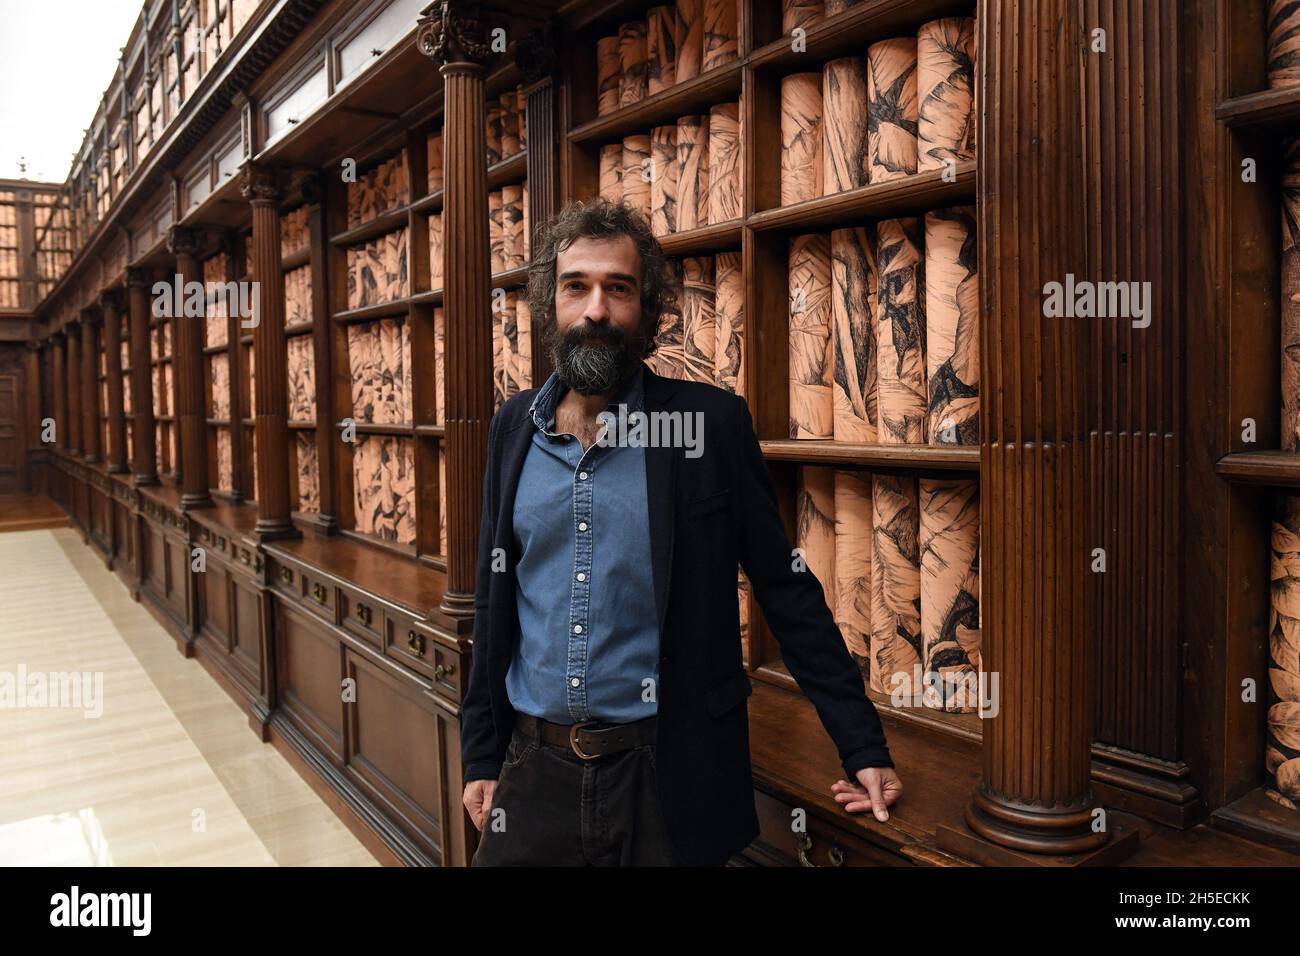 Italian artist Pietro Ruffo poses within his site specific installation 'The Clearest Way' in the Barberini Hall of the Vatican Library transformed âinto a lush tropical forestâ with Ruffo's rolled botanical prints lining the 17th-century wooden bookcases on November 08, 2021at the Vatican. The Apostolic Library is opening up to the public for the first time with a dedicated space for temporary exhibitions of contemporary art by Italian artist Pietro Ruffo. The exhibit goes under the title âEveryone: Humanity on its way, recalls the Pope s encyclical Fratelli tutti, and turns part of the Stock Photo